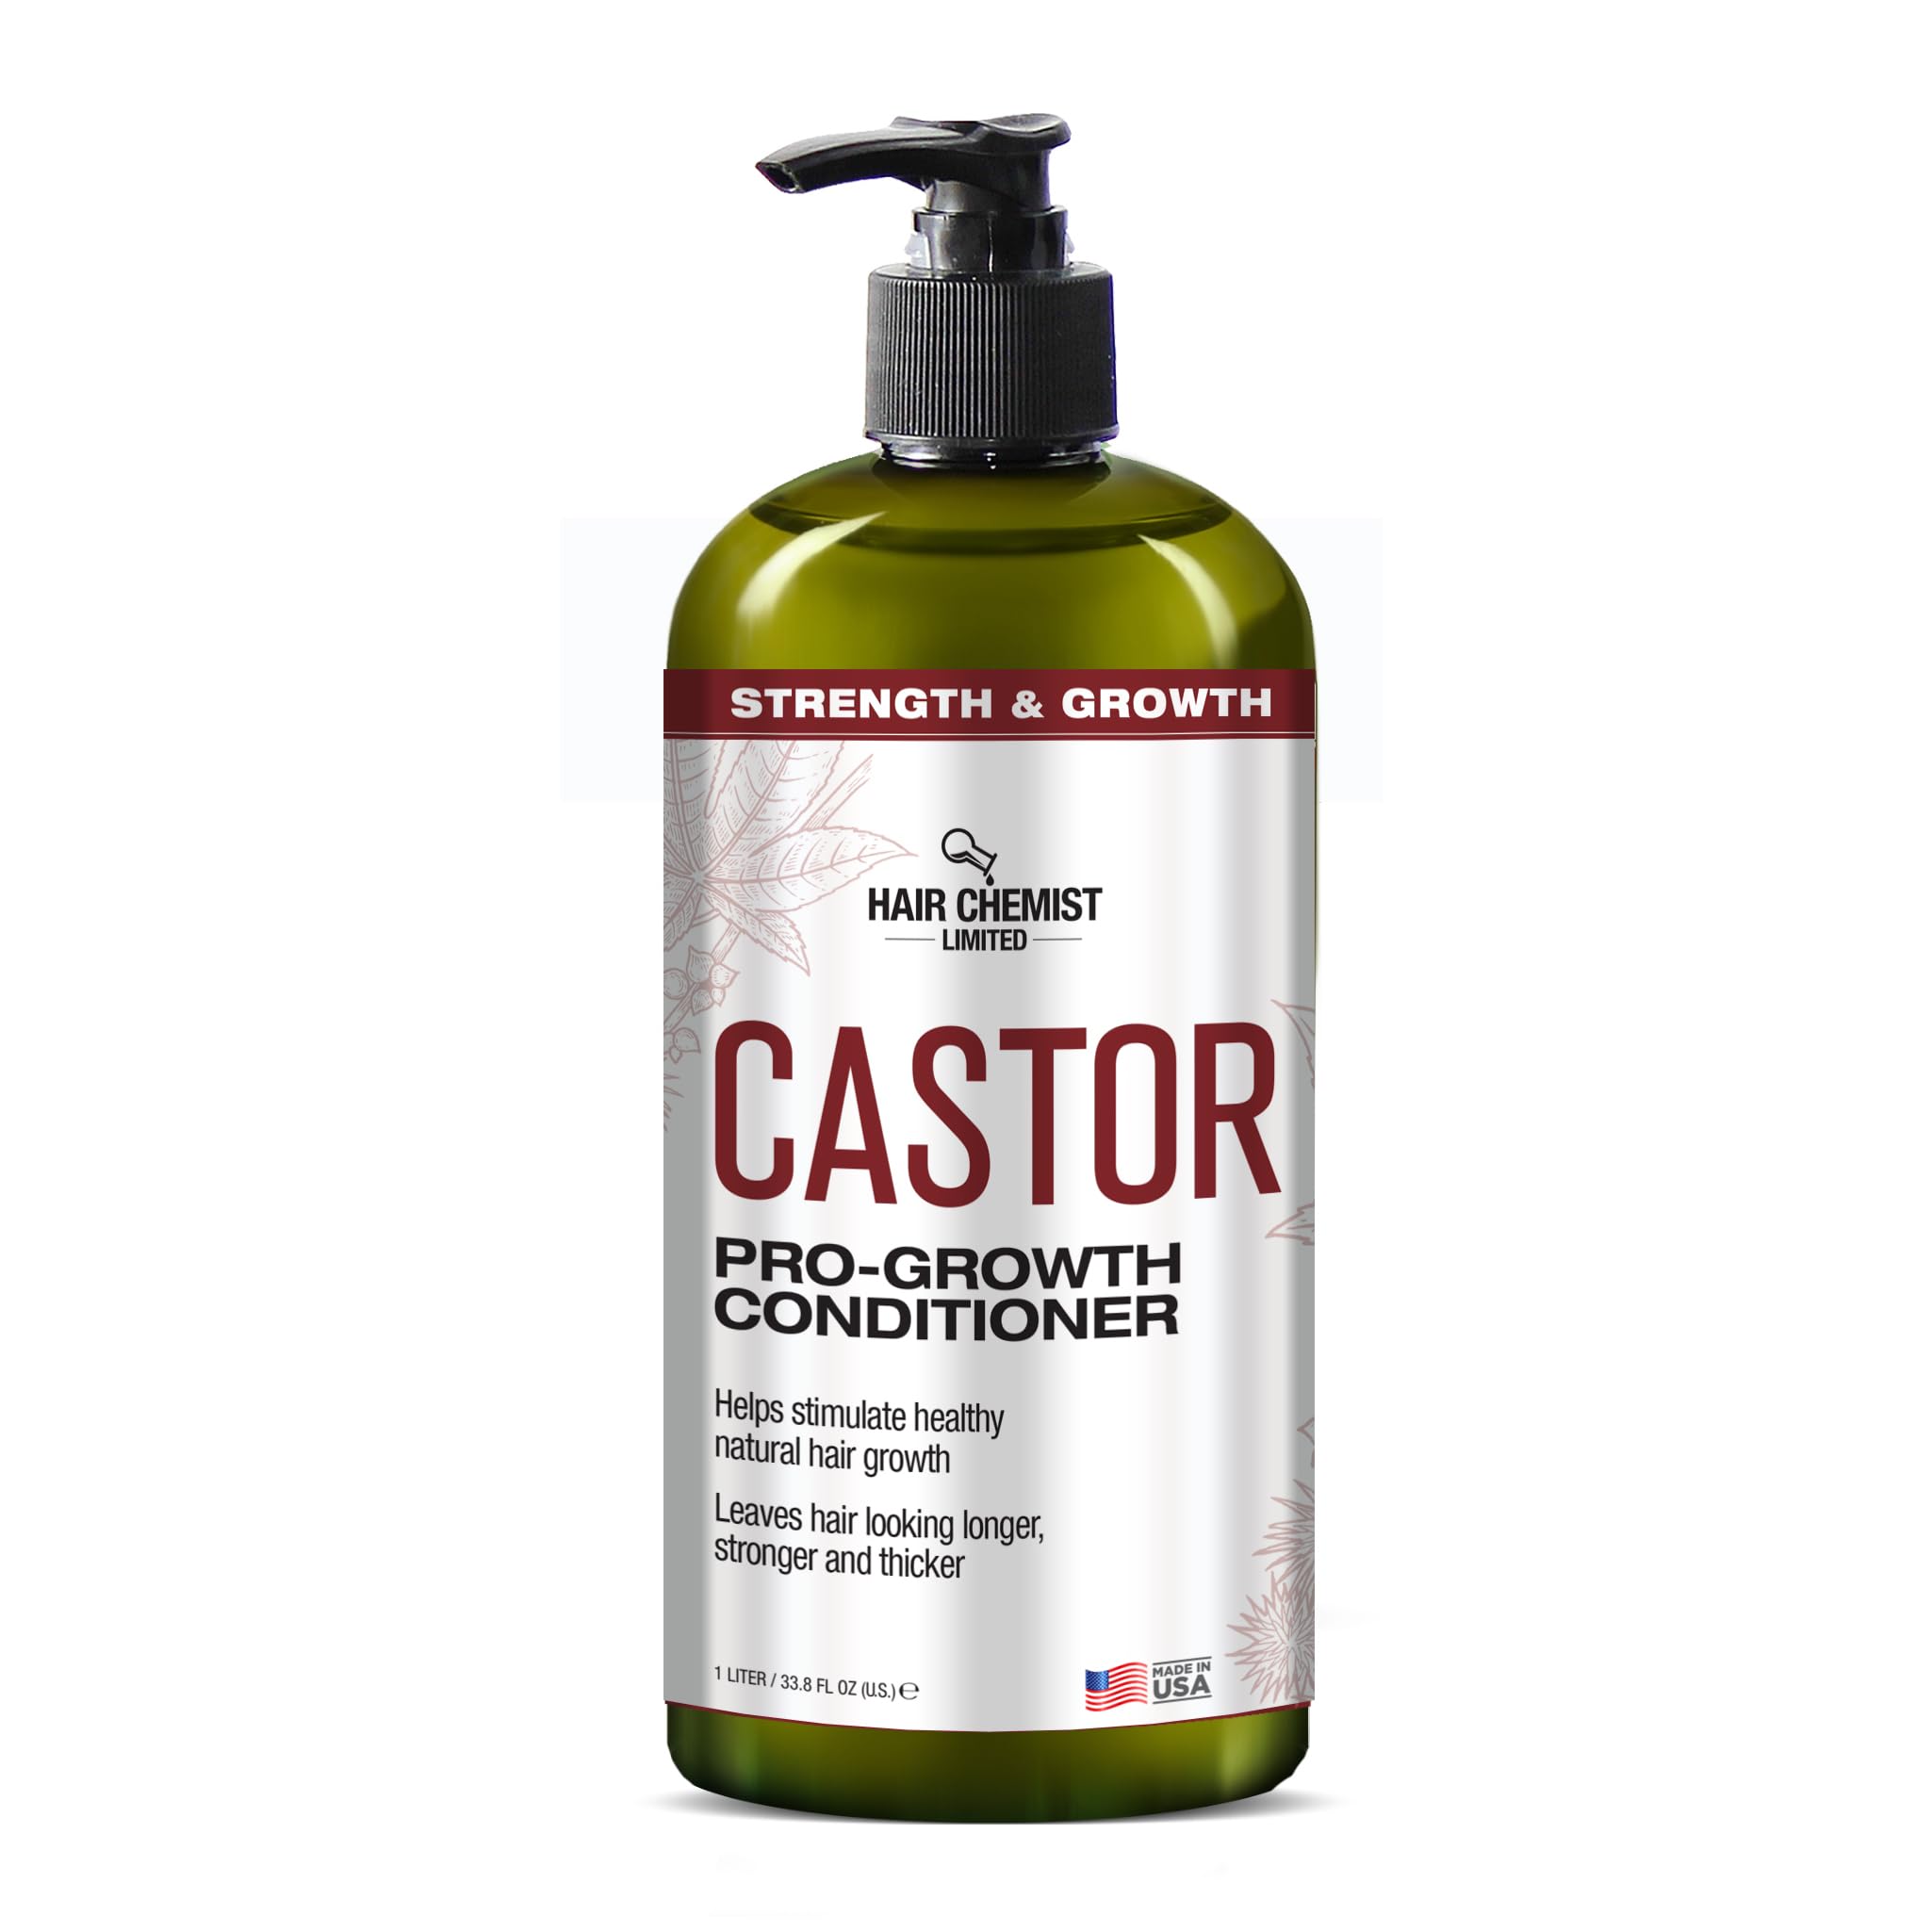 Hair Chemist Castor Pro-Growth Conditioner 33.8 oz. - Nourishing Conditioner with Castor Oil